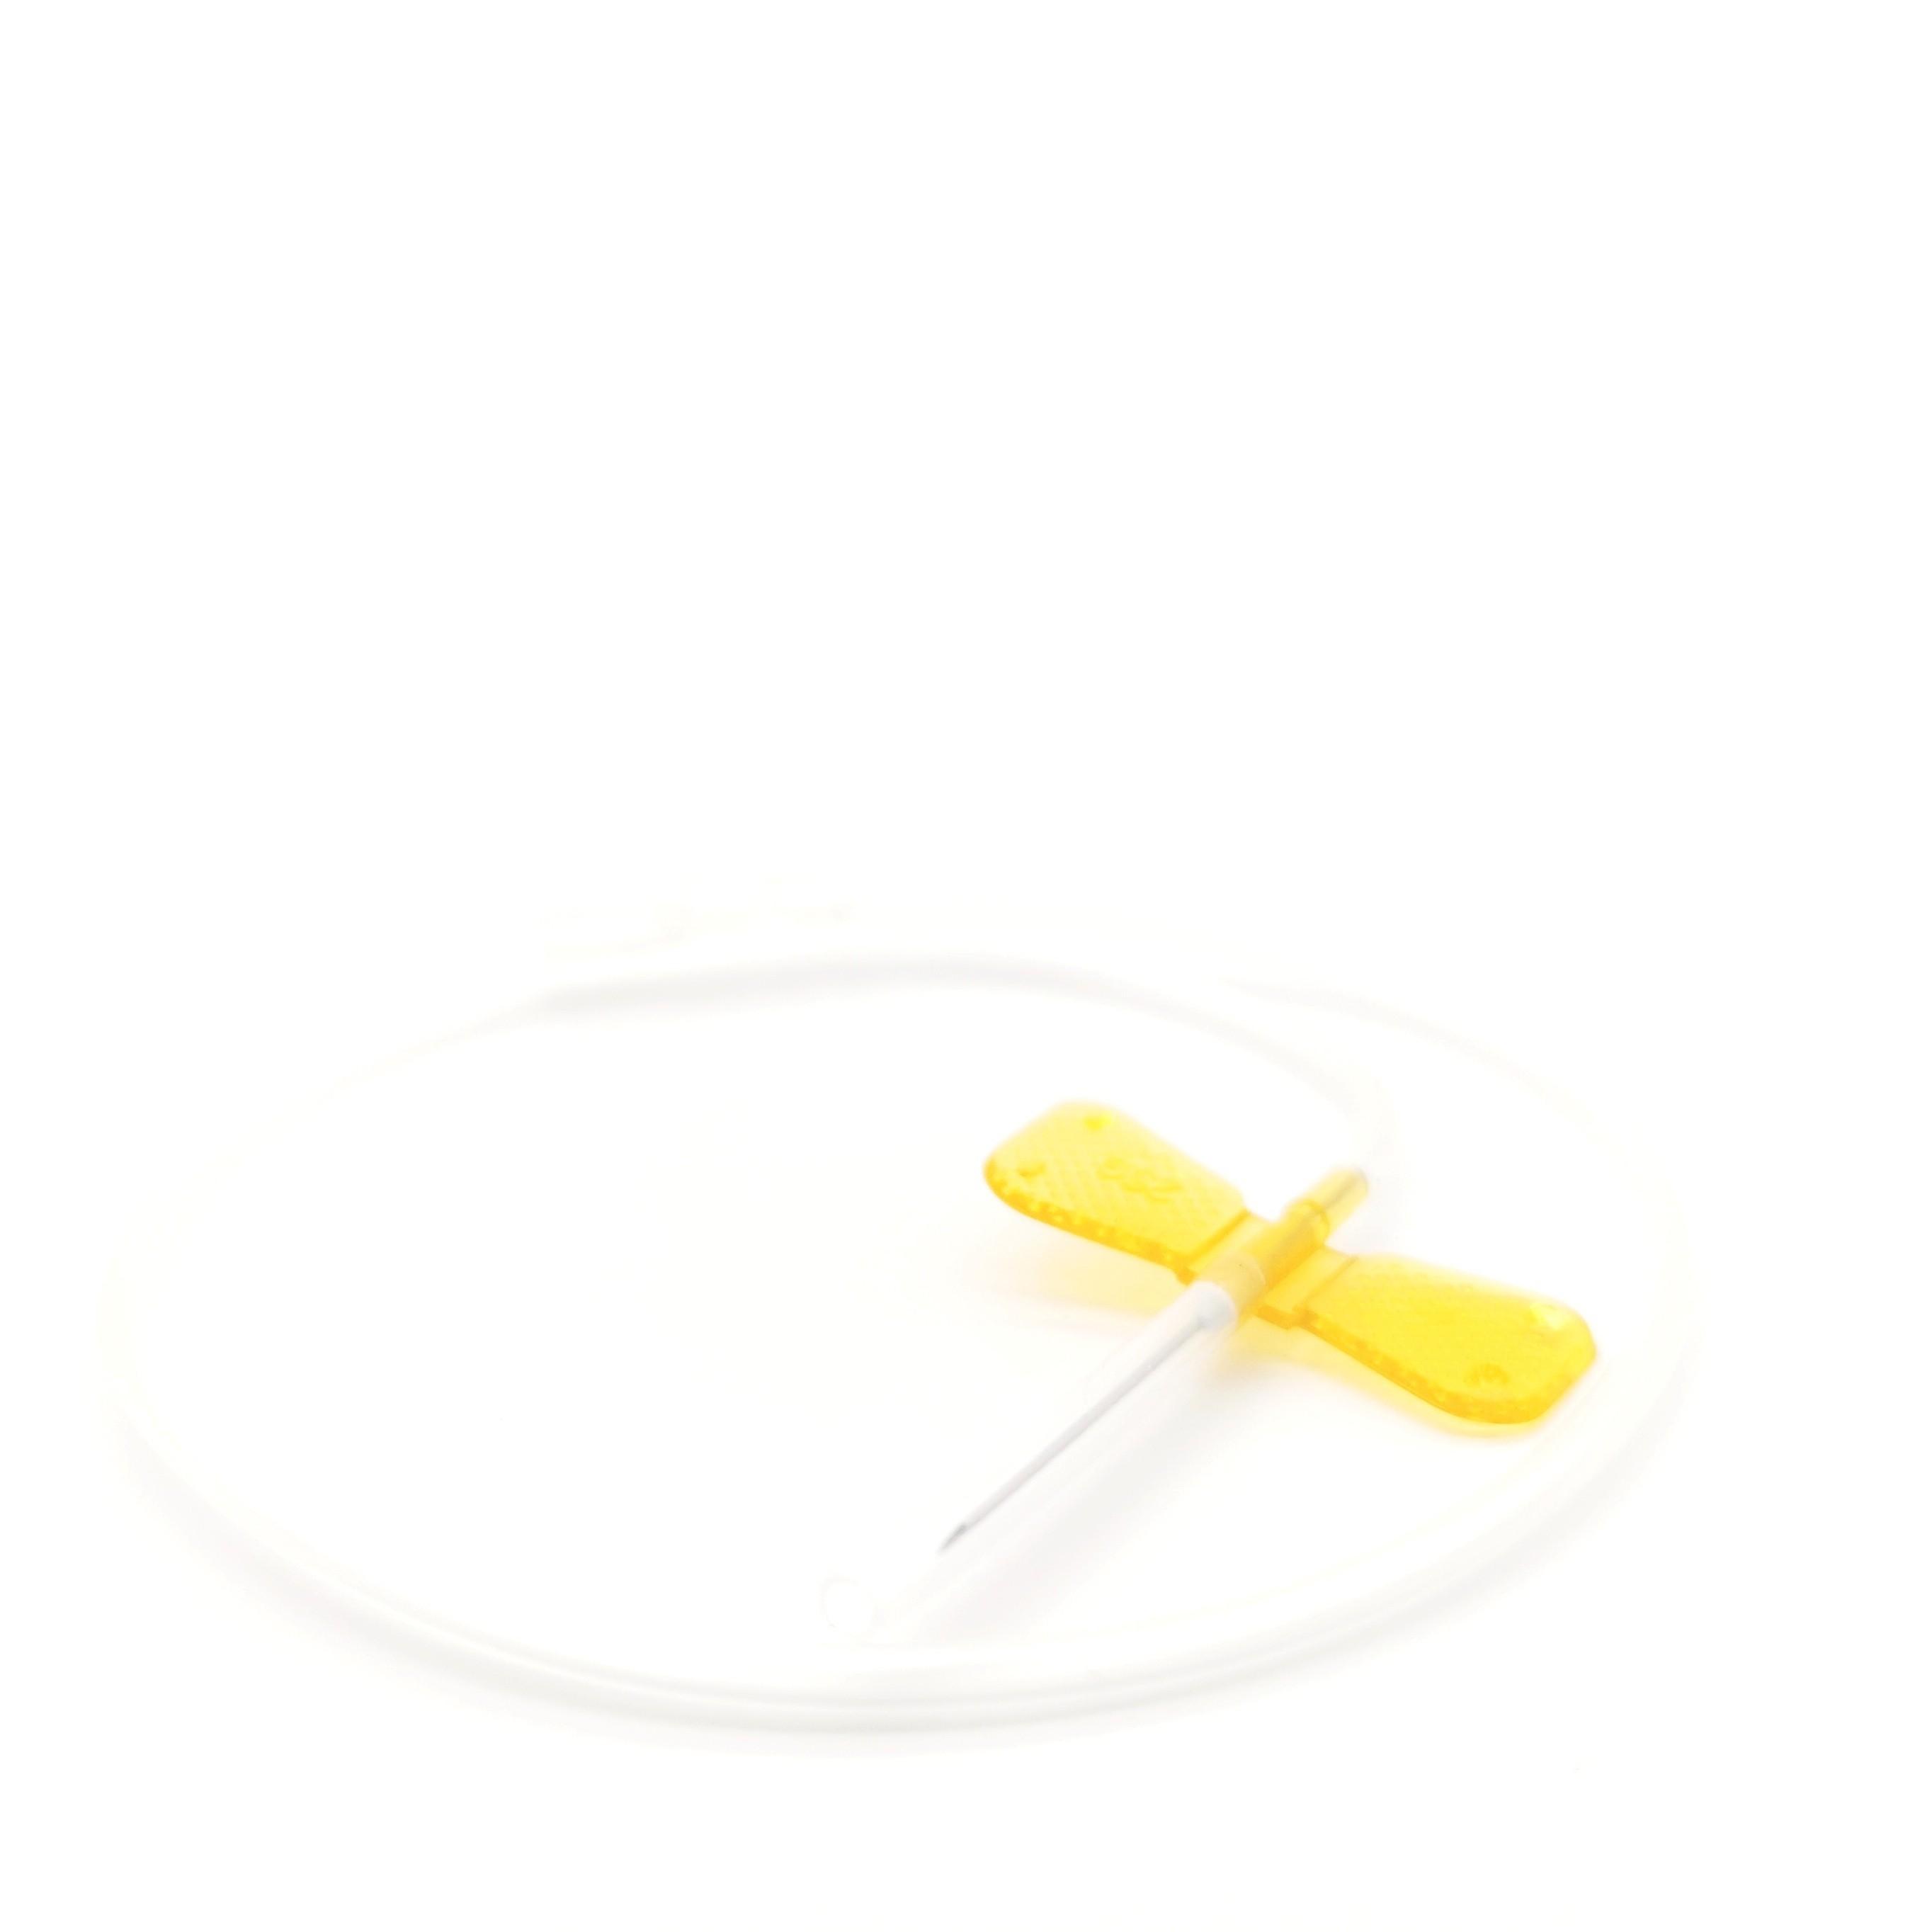 Disposable Blood Collection Butterfly Needle